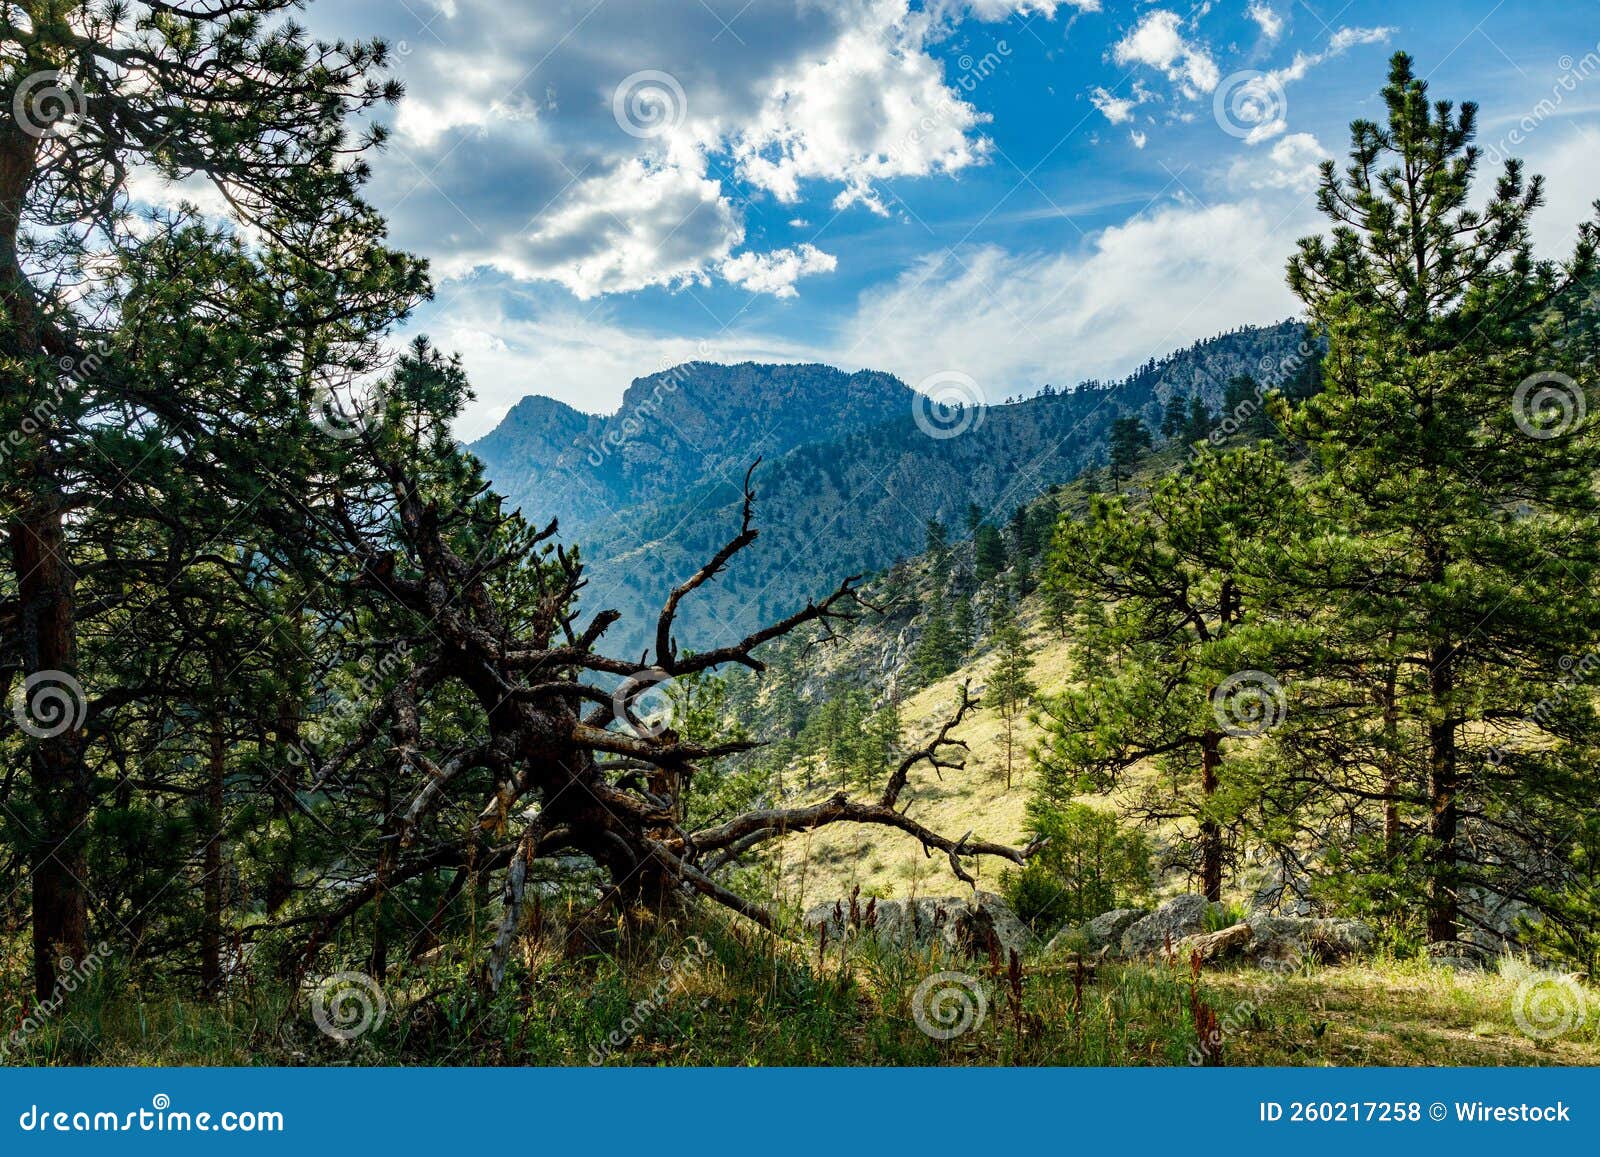 beautiful landscape view of the trees and mountains of estres park in colorado, usa